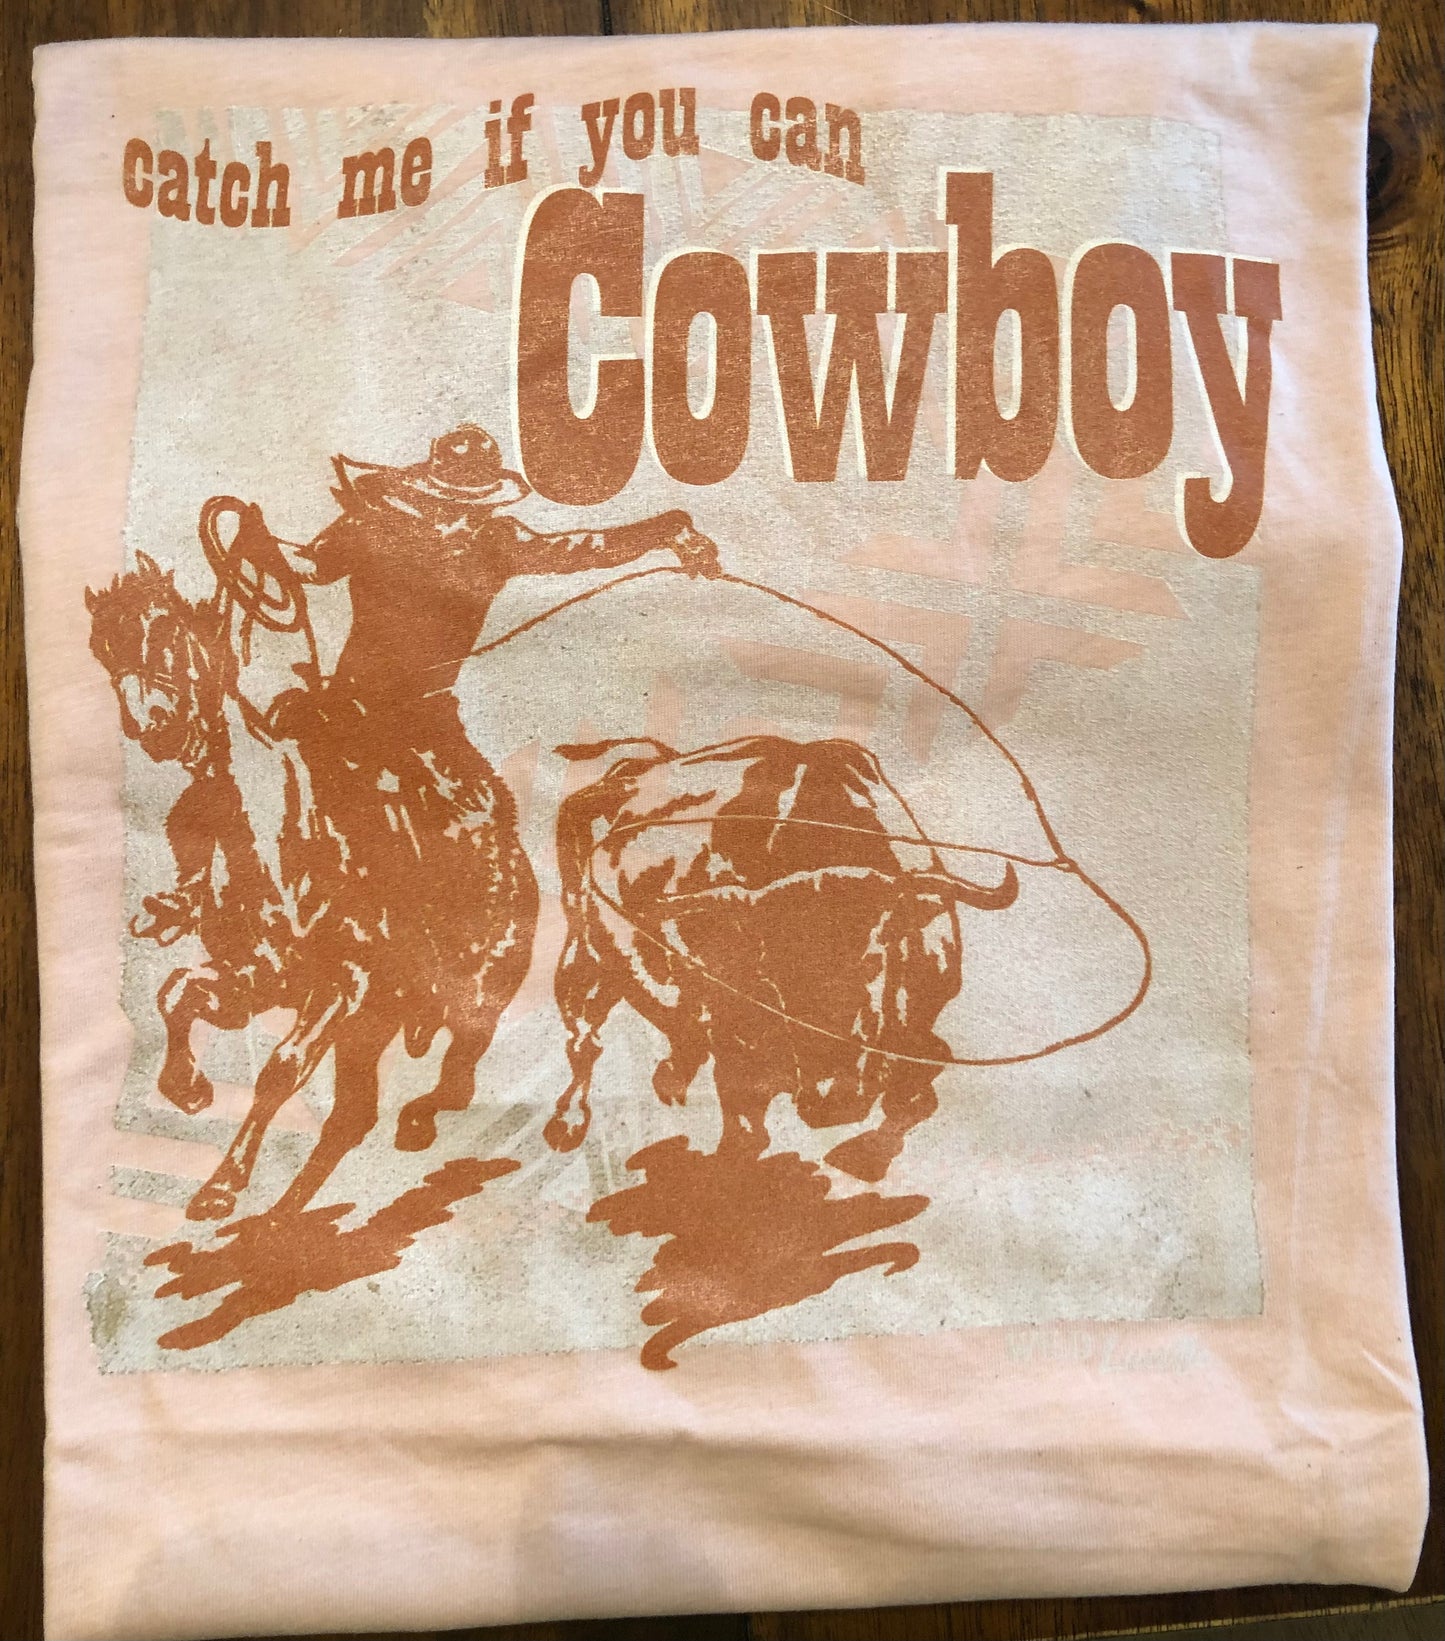 Catch me if you can cowboy